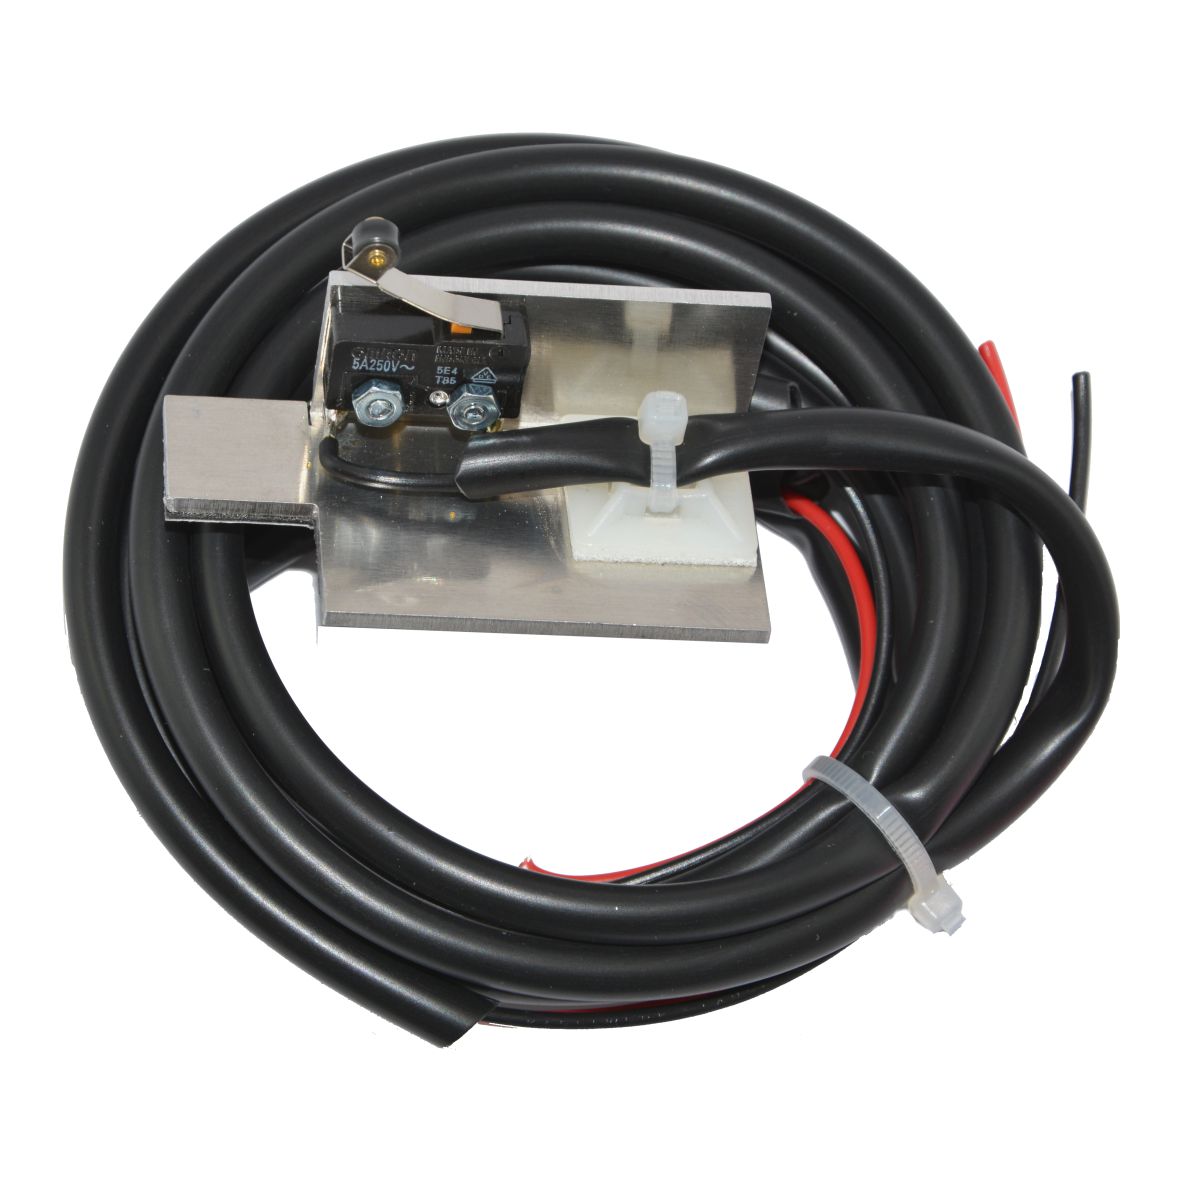 SOG Type D Cable Loom and Microswitch